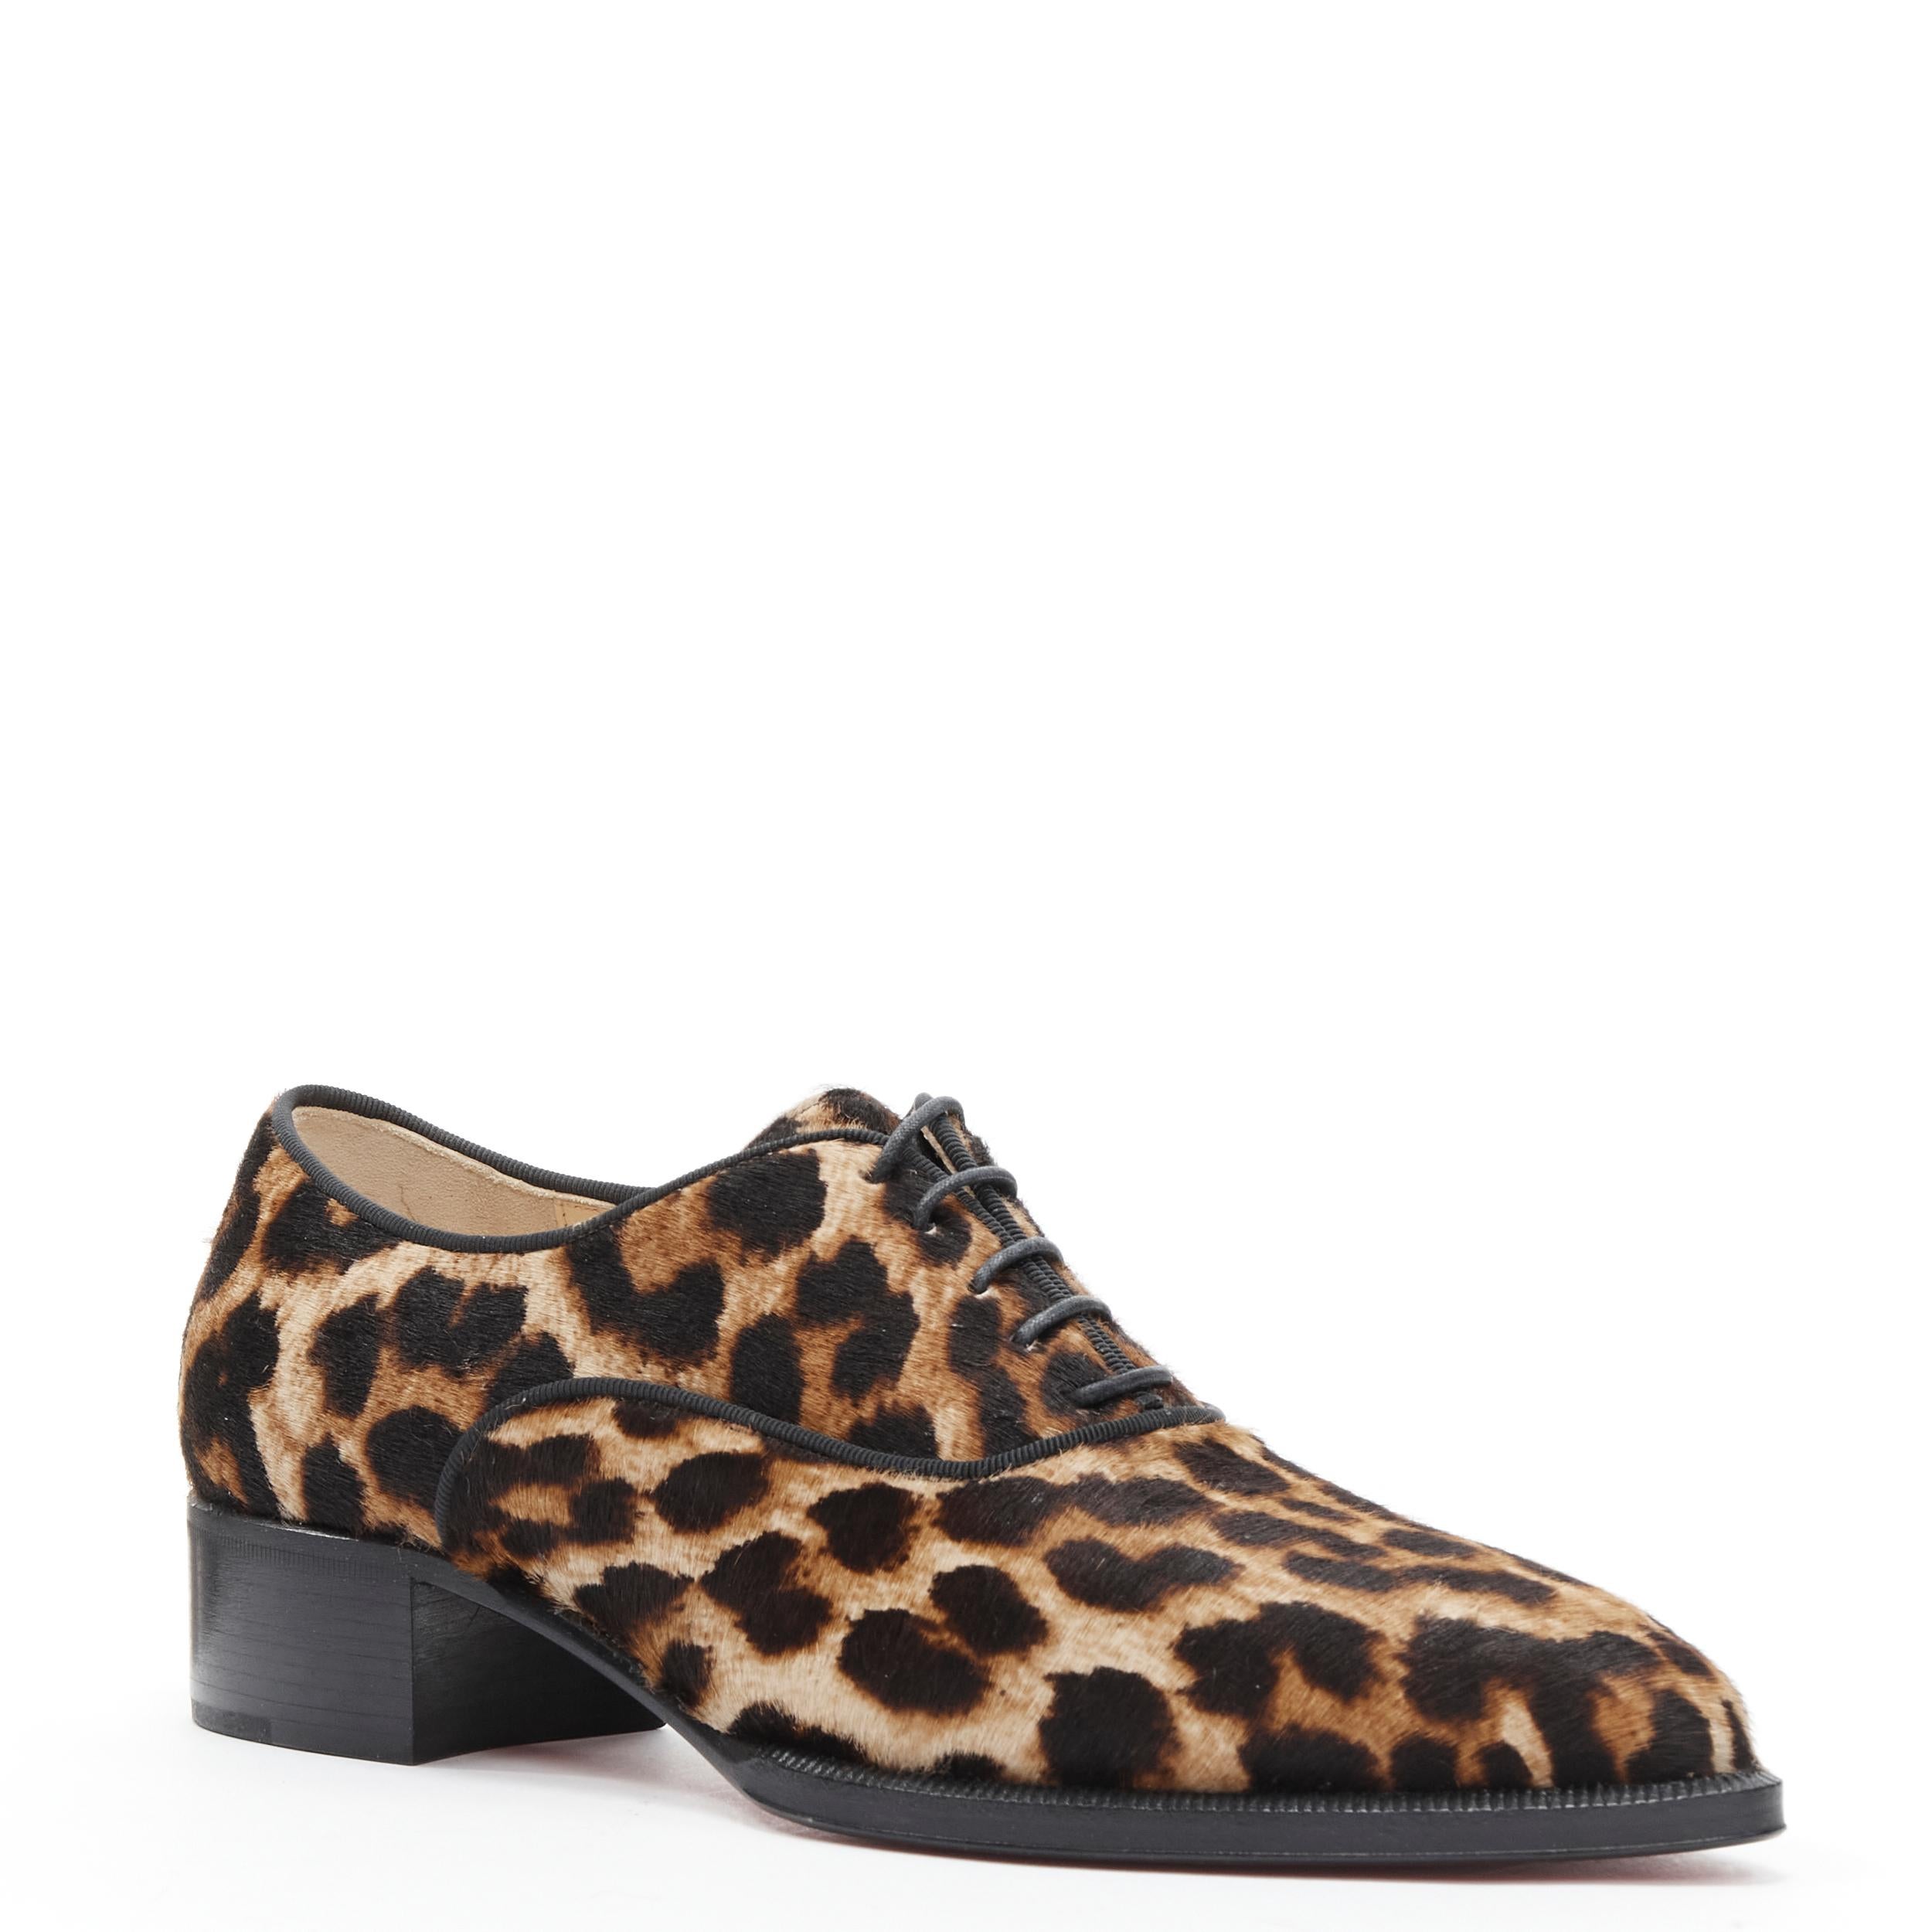 new CHRISTIAN LOUBOUTIN Zazou Flat Pony brown leopard spot oxford brogue EU35 
Reference: TGAS/B01877 
Brand: Christian Louboutin 
Designer: Christian Louboutin 
Model: Zazou 
Material: Pony 
Color: Brown 
Pattern: Leopard 
Made in: Italy